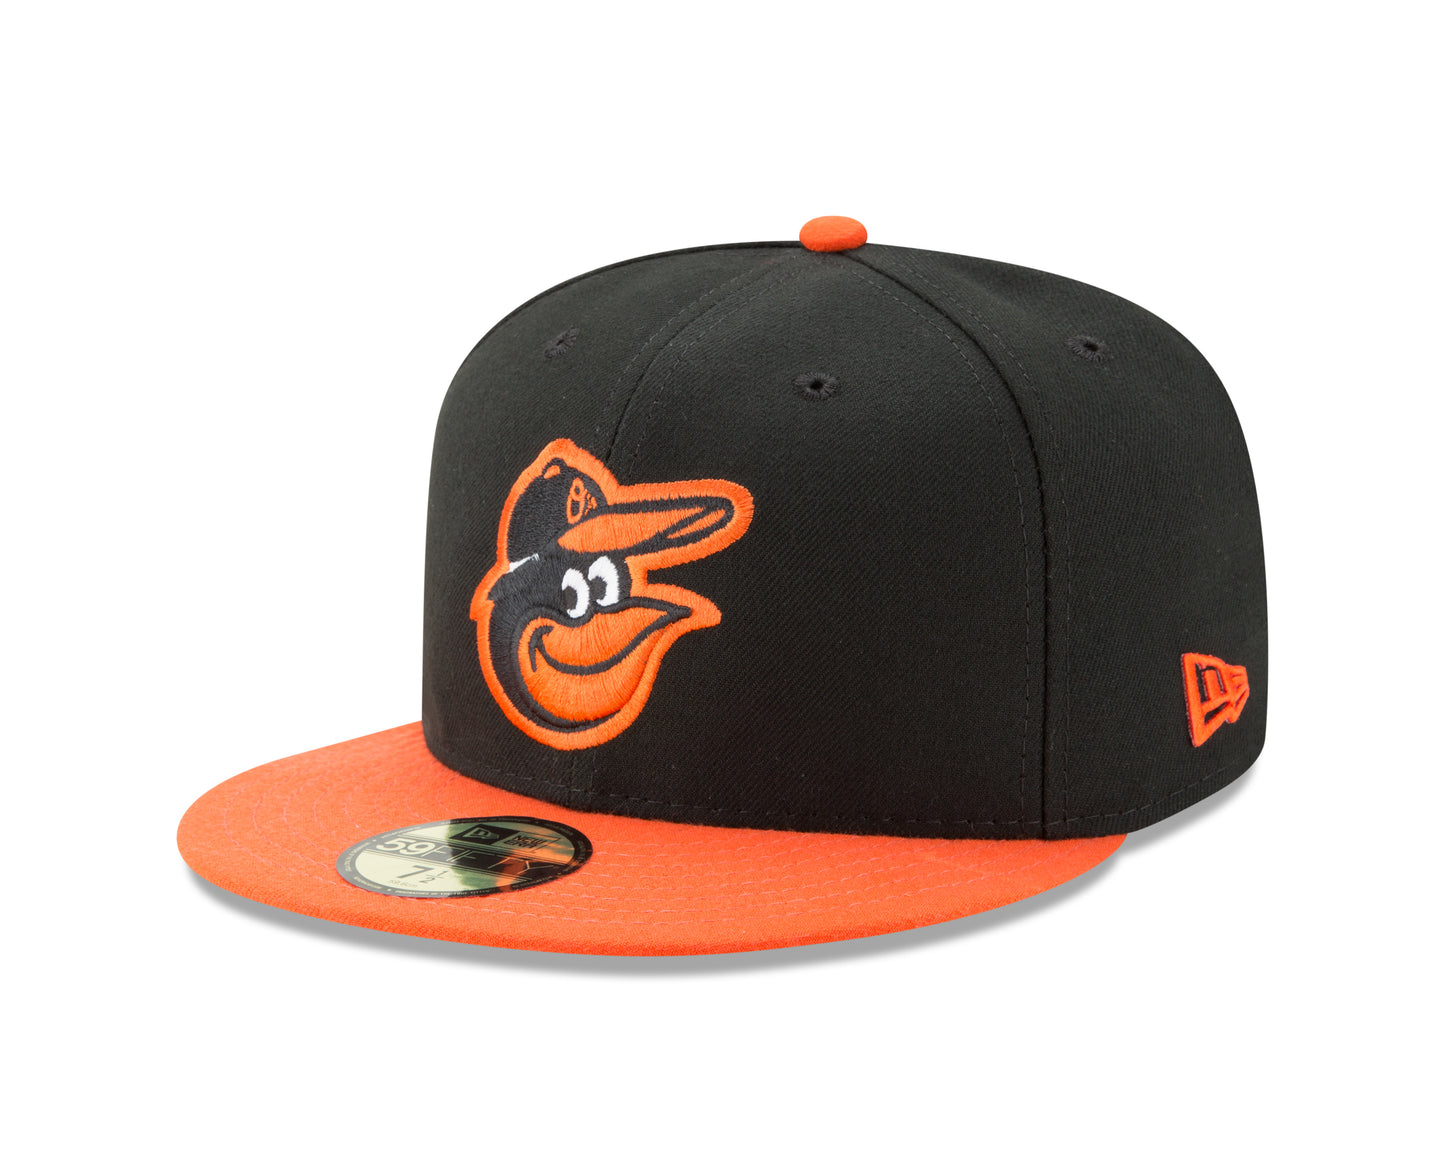 Baltimore Orioles New Era On-Field Authentic 59FIFTY Road Bird Hat - Black